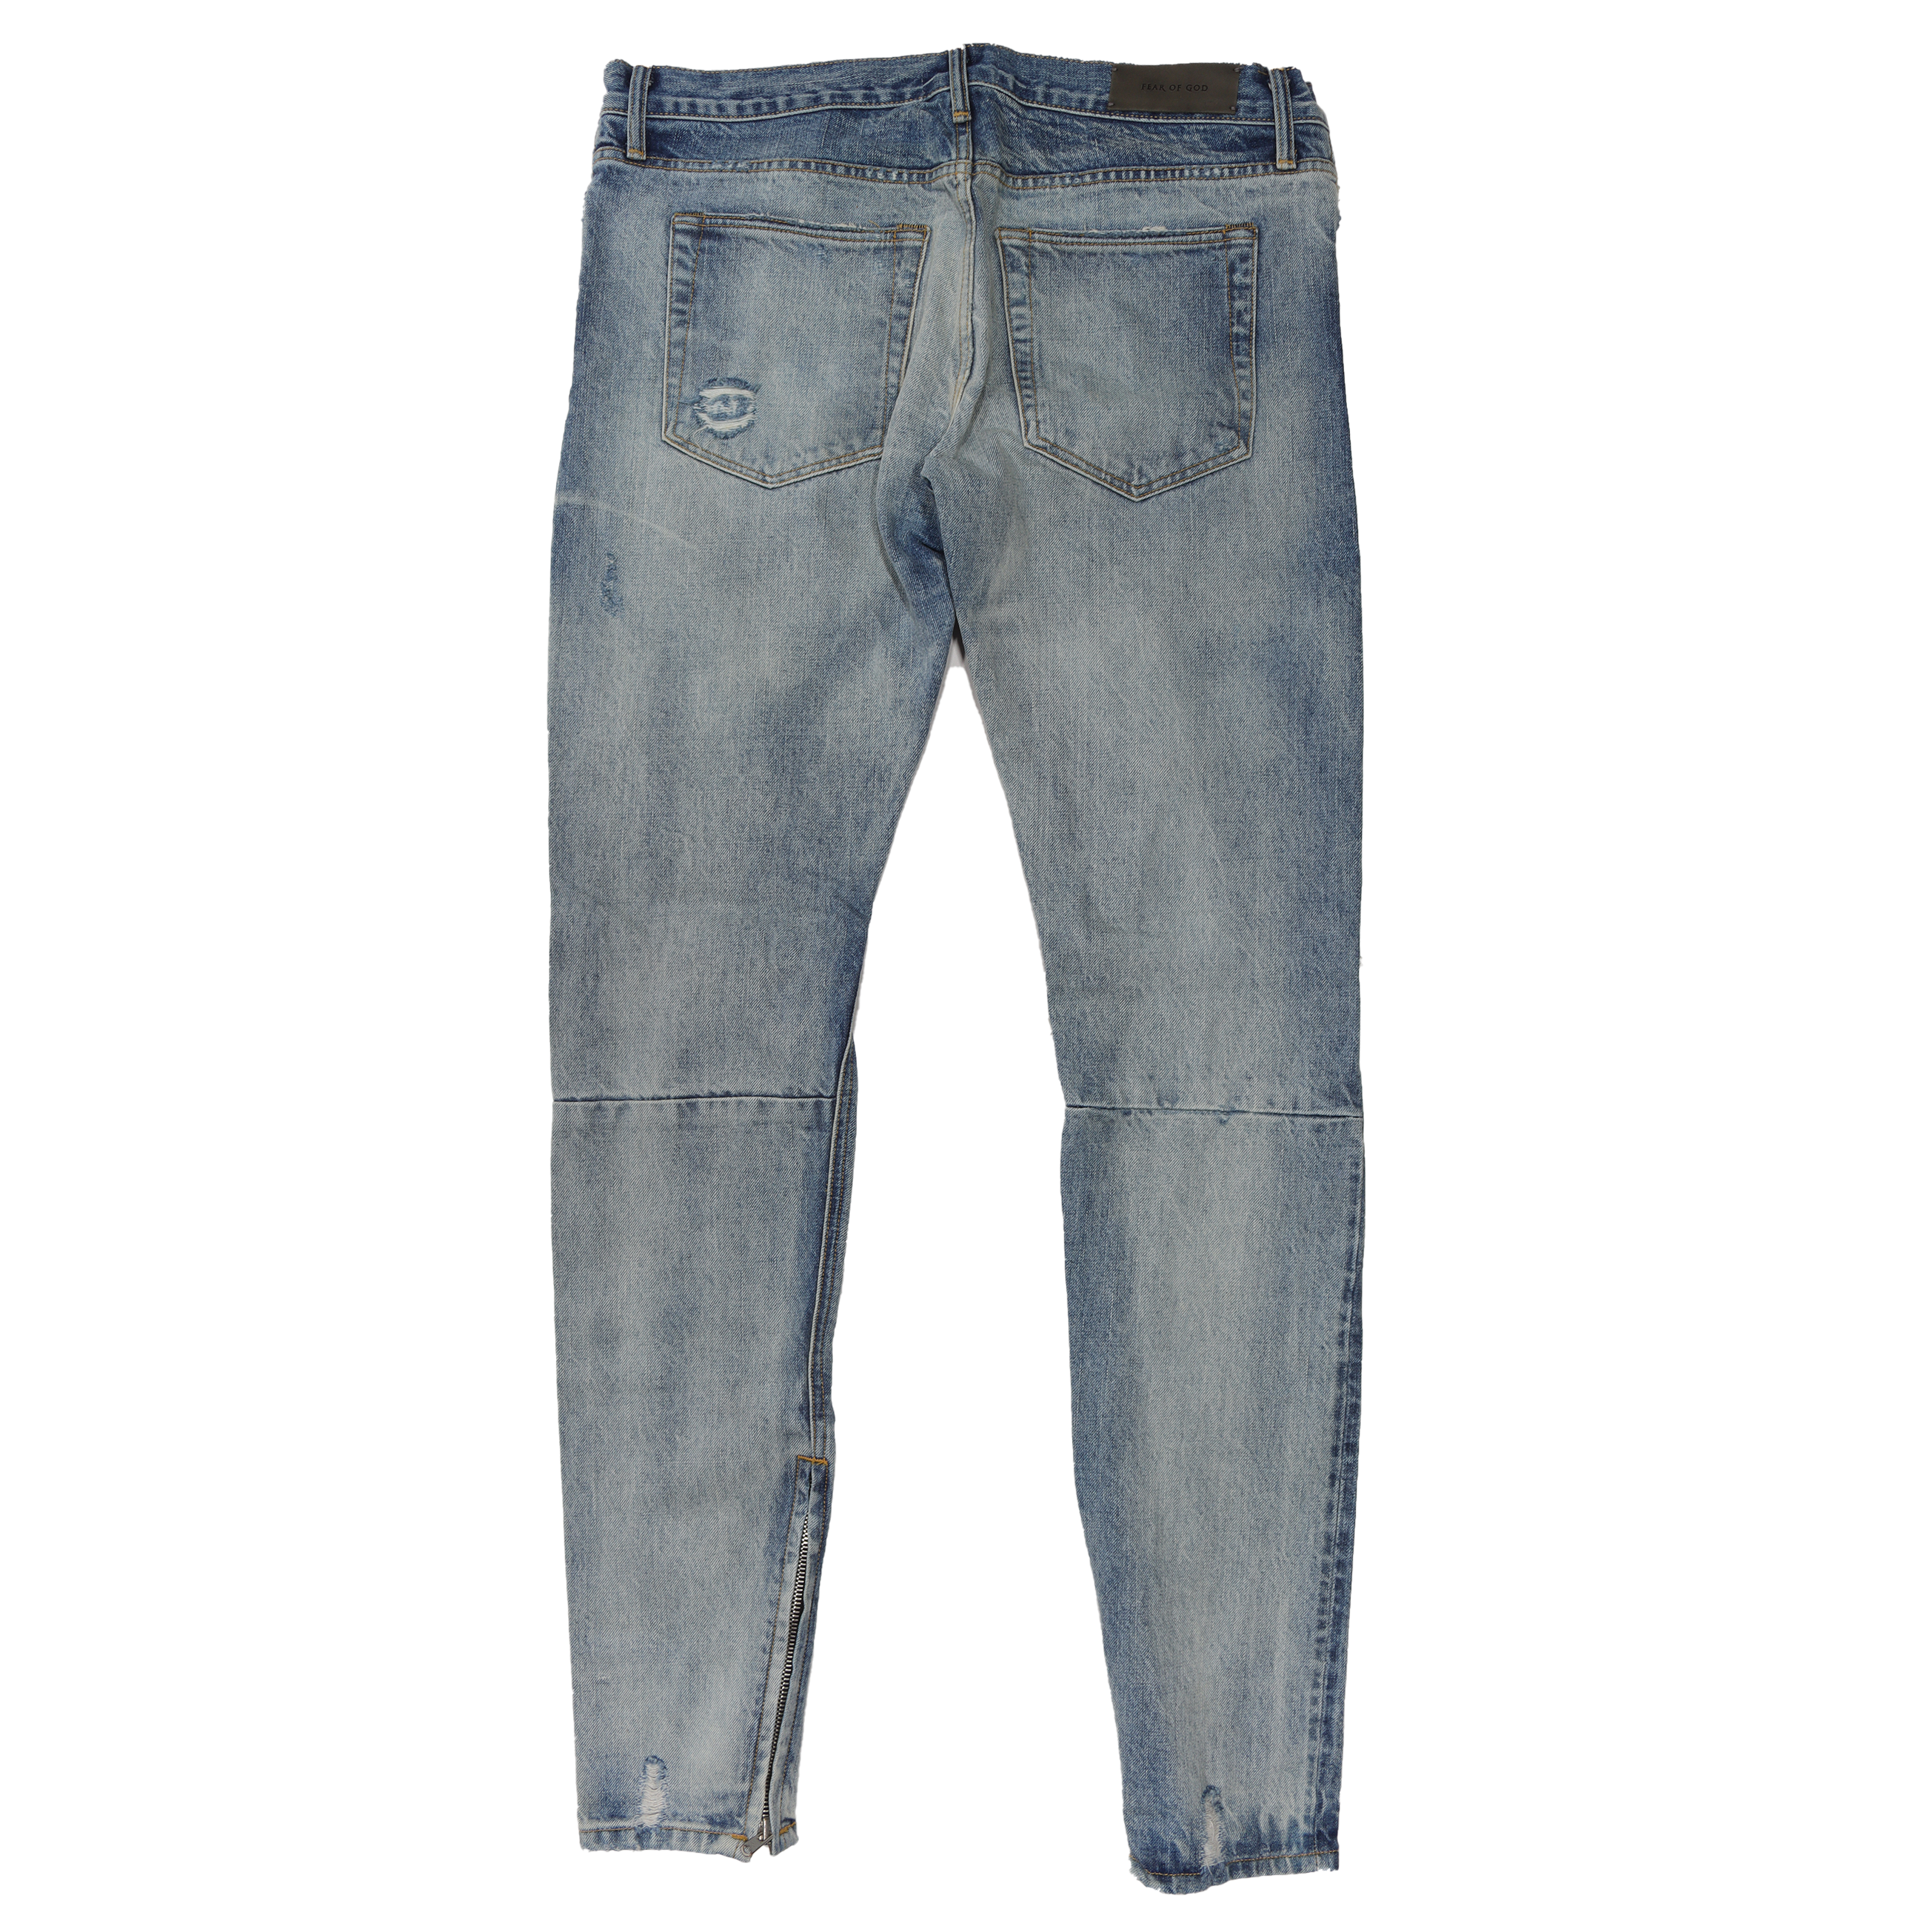 Fourth Collection Selvedge Distressed Denim